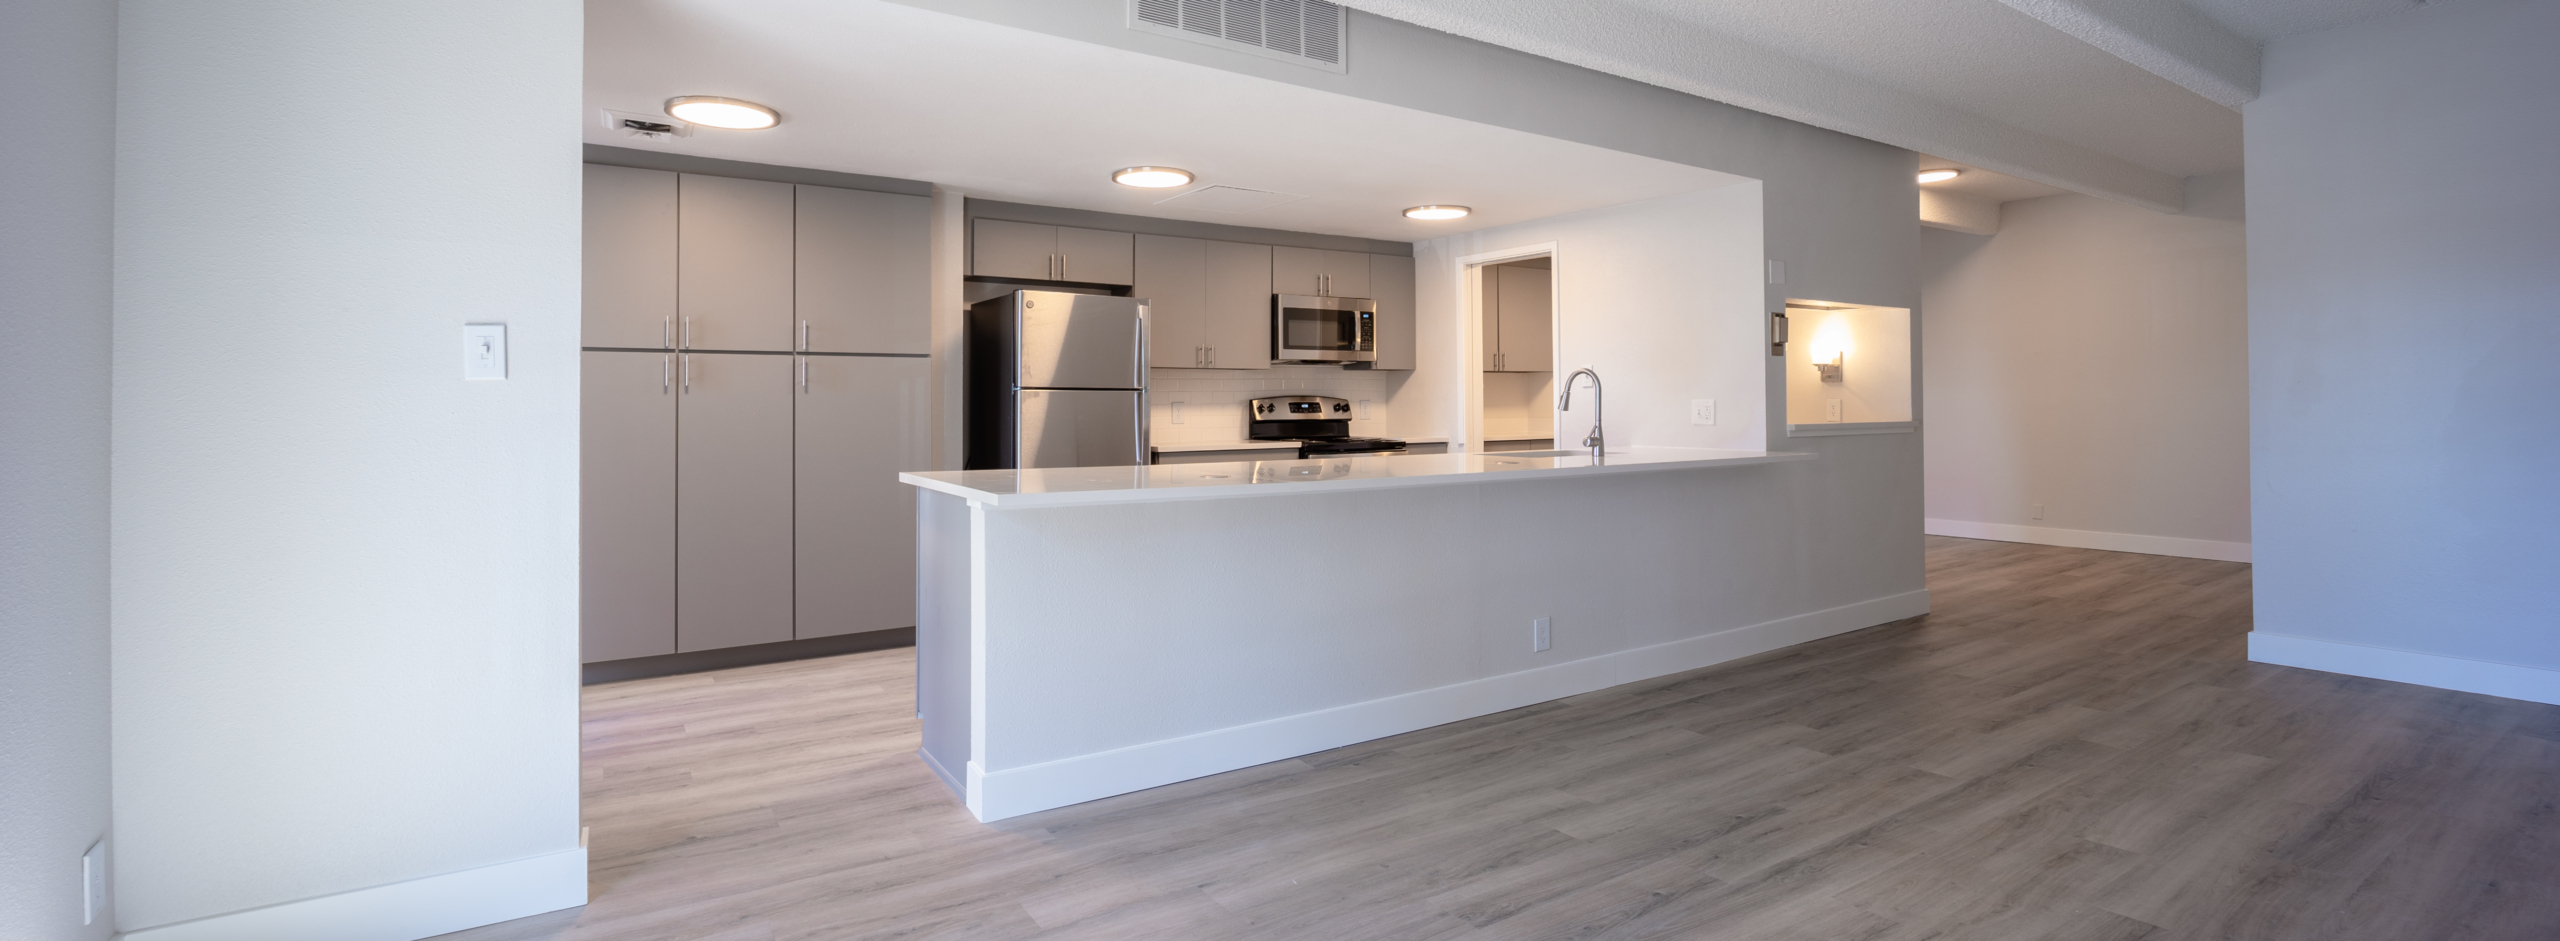 Lex and Lowry Upgraded Multifamily Unit Renovation